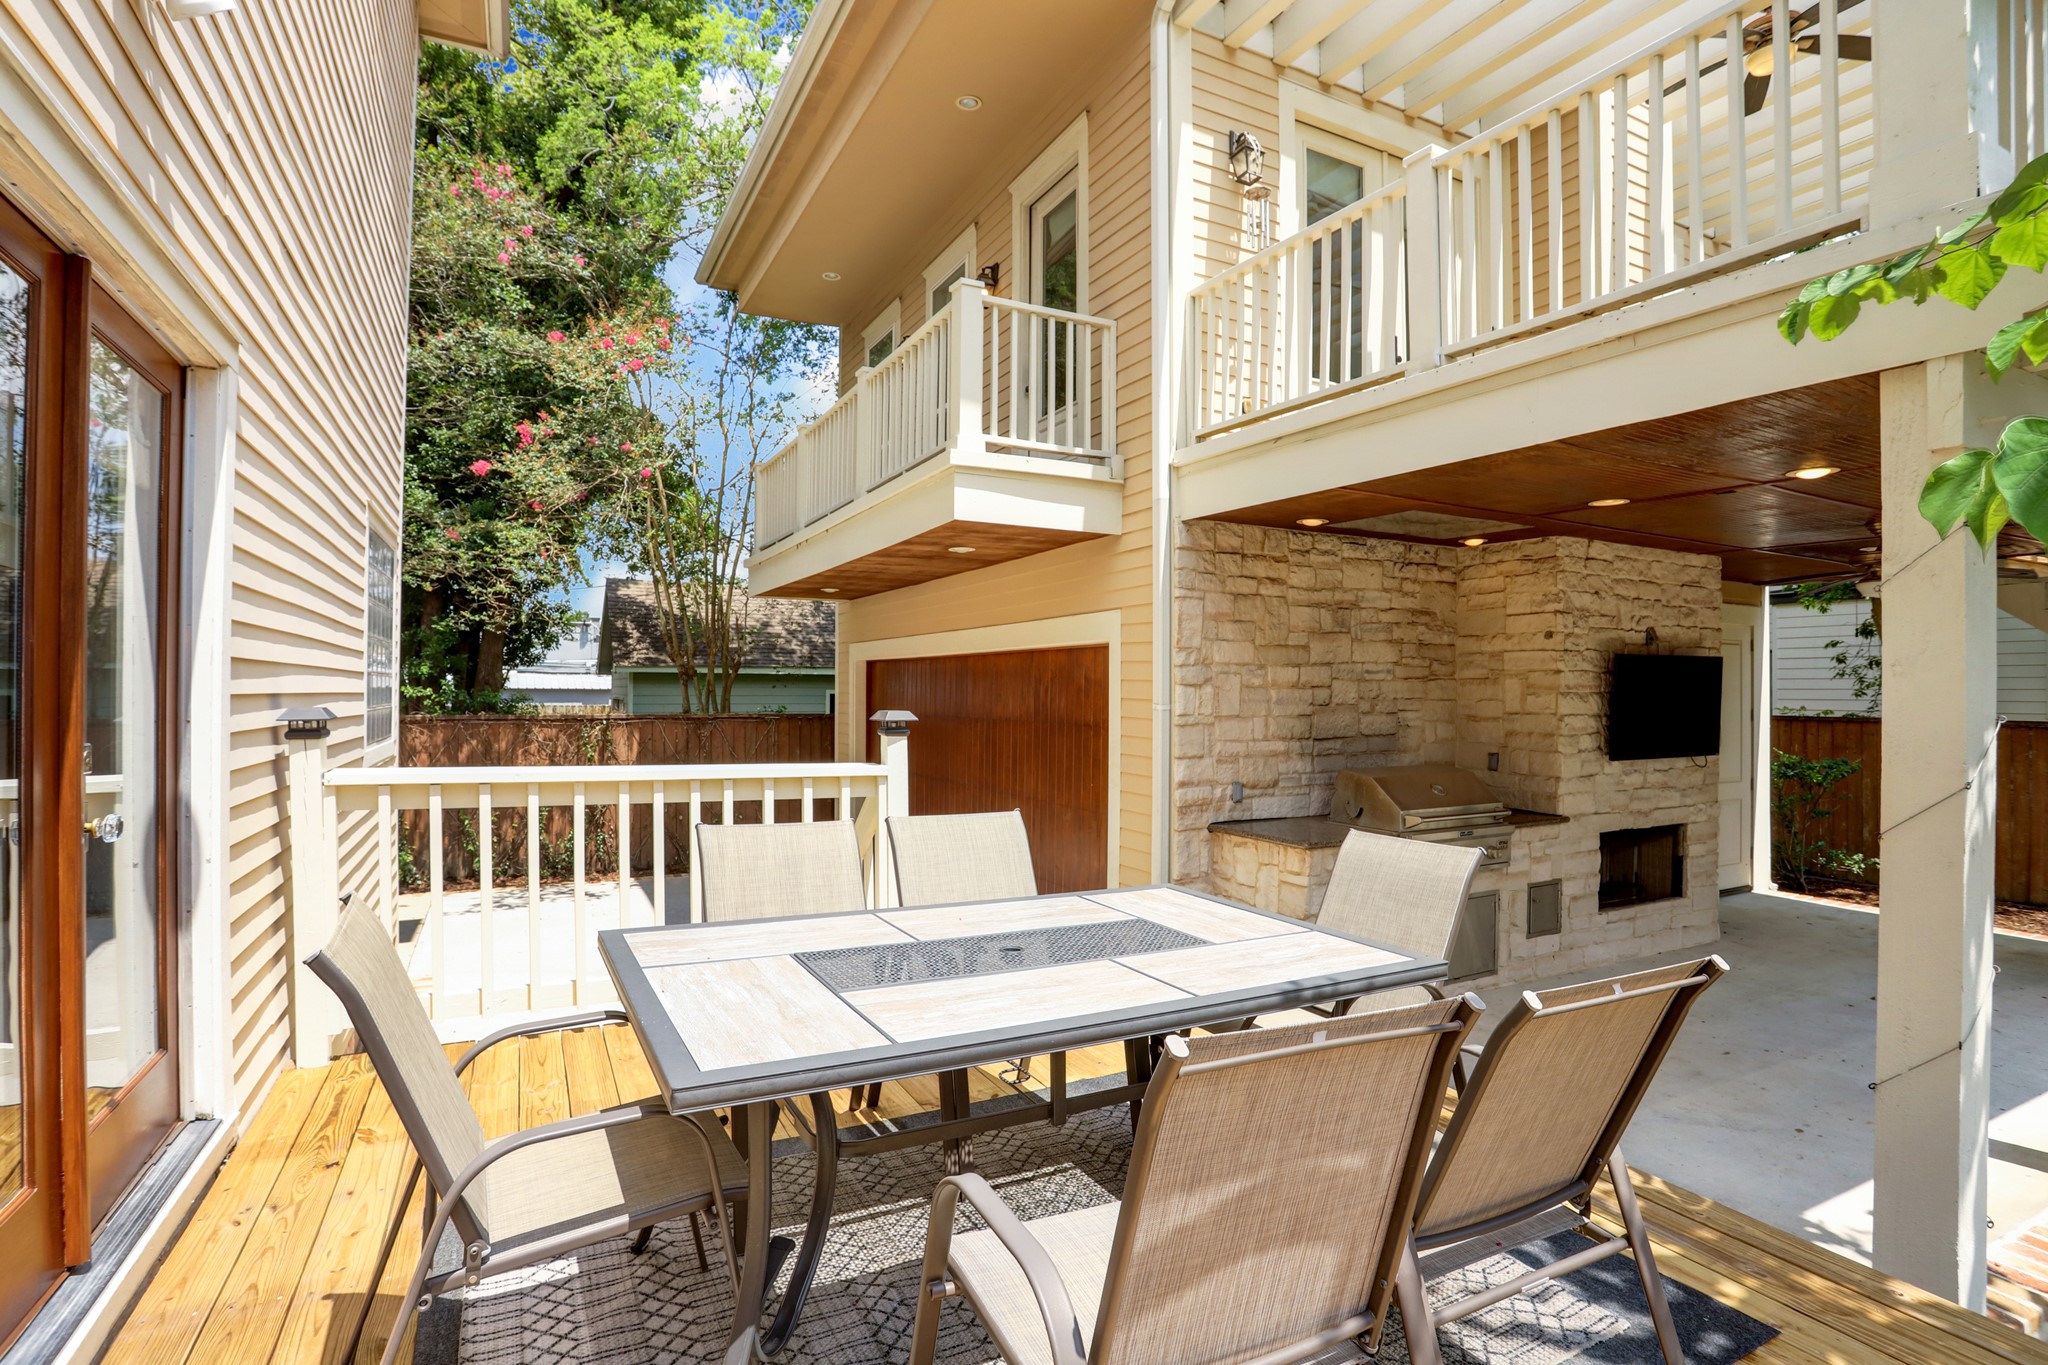 Outdoor deck offers an area uncovered for dining or relaxing.